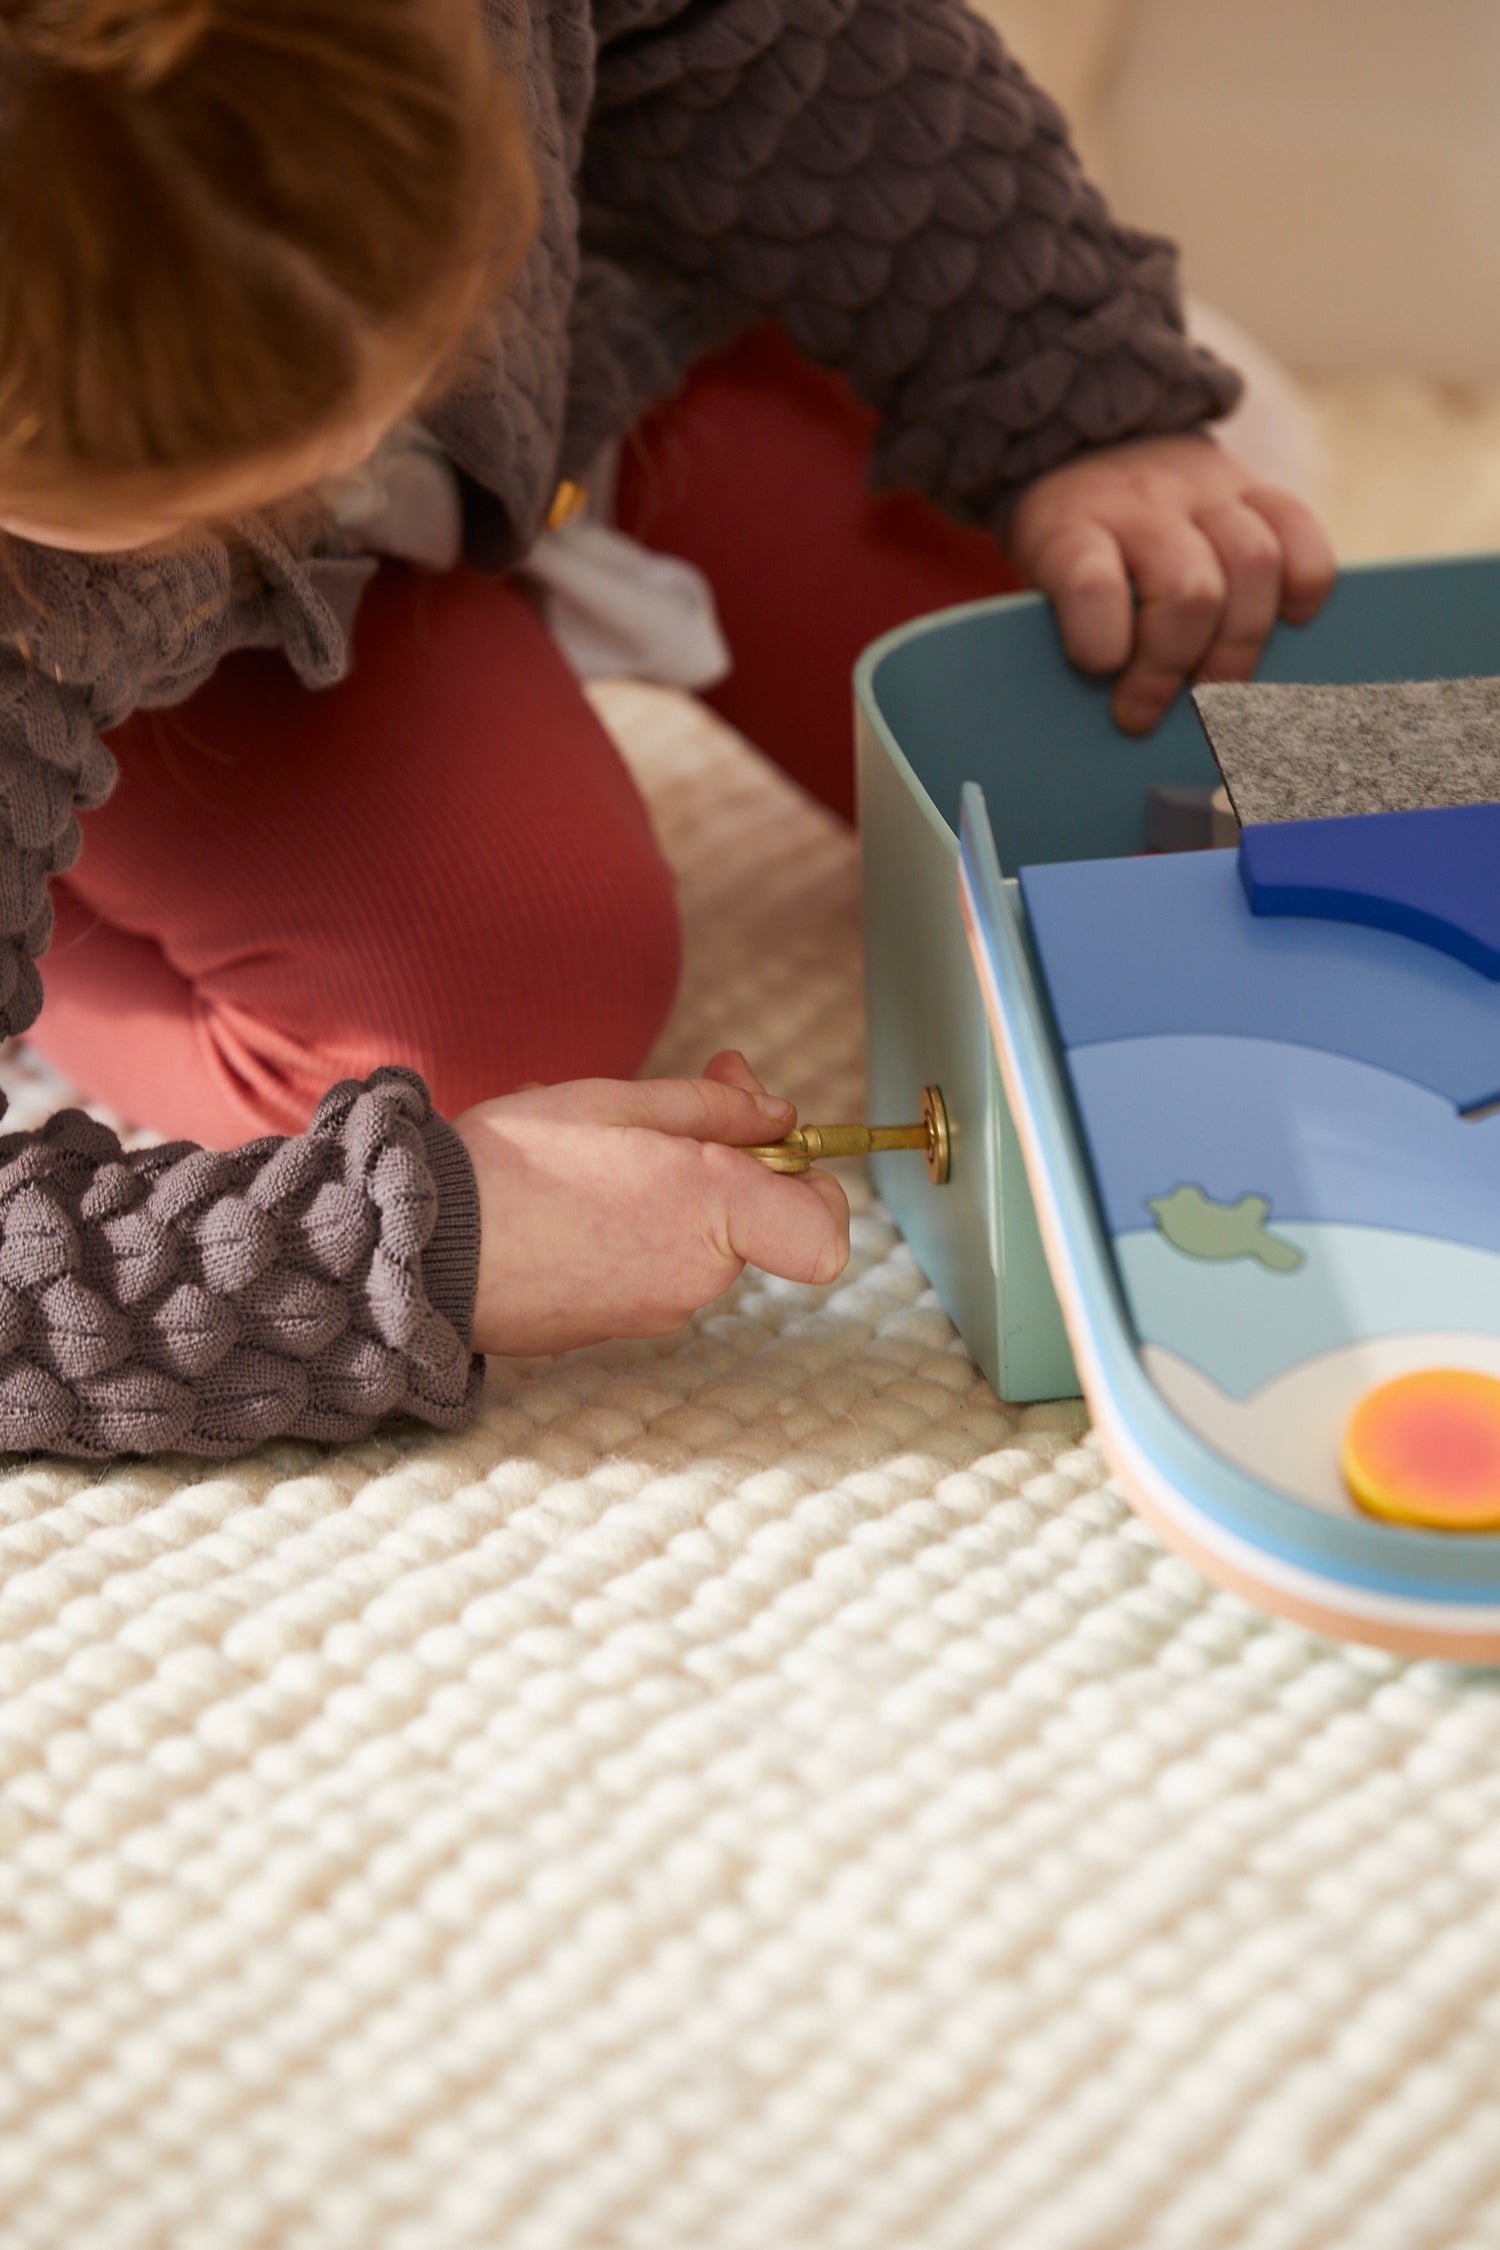 educational_toy_suitcase_ocean_key_motor_skills_development_play_sustainable_shapes_colours.jpg